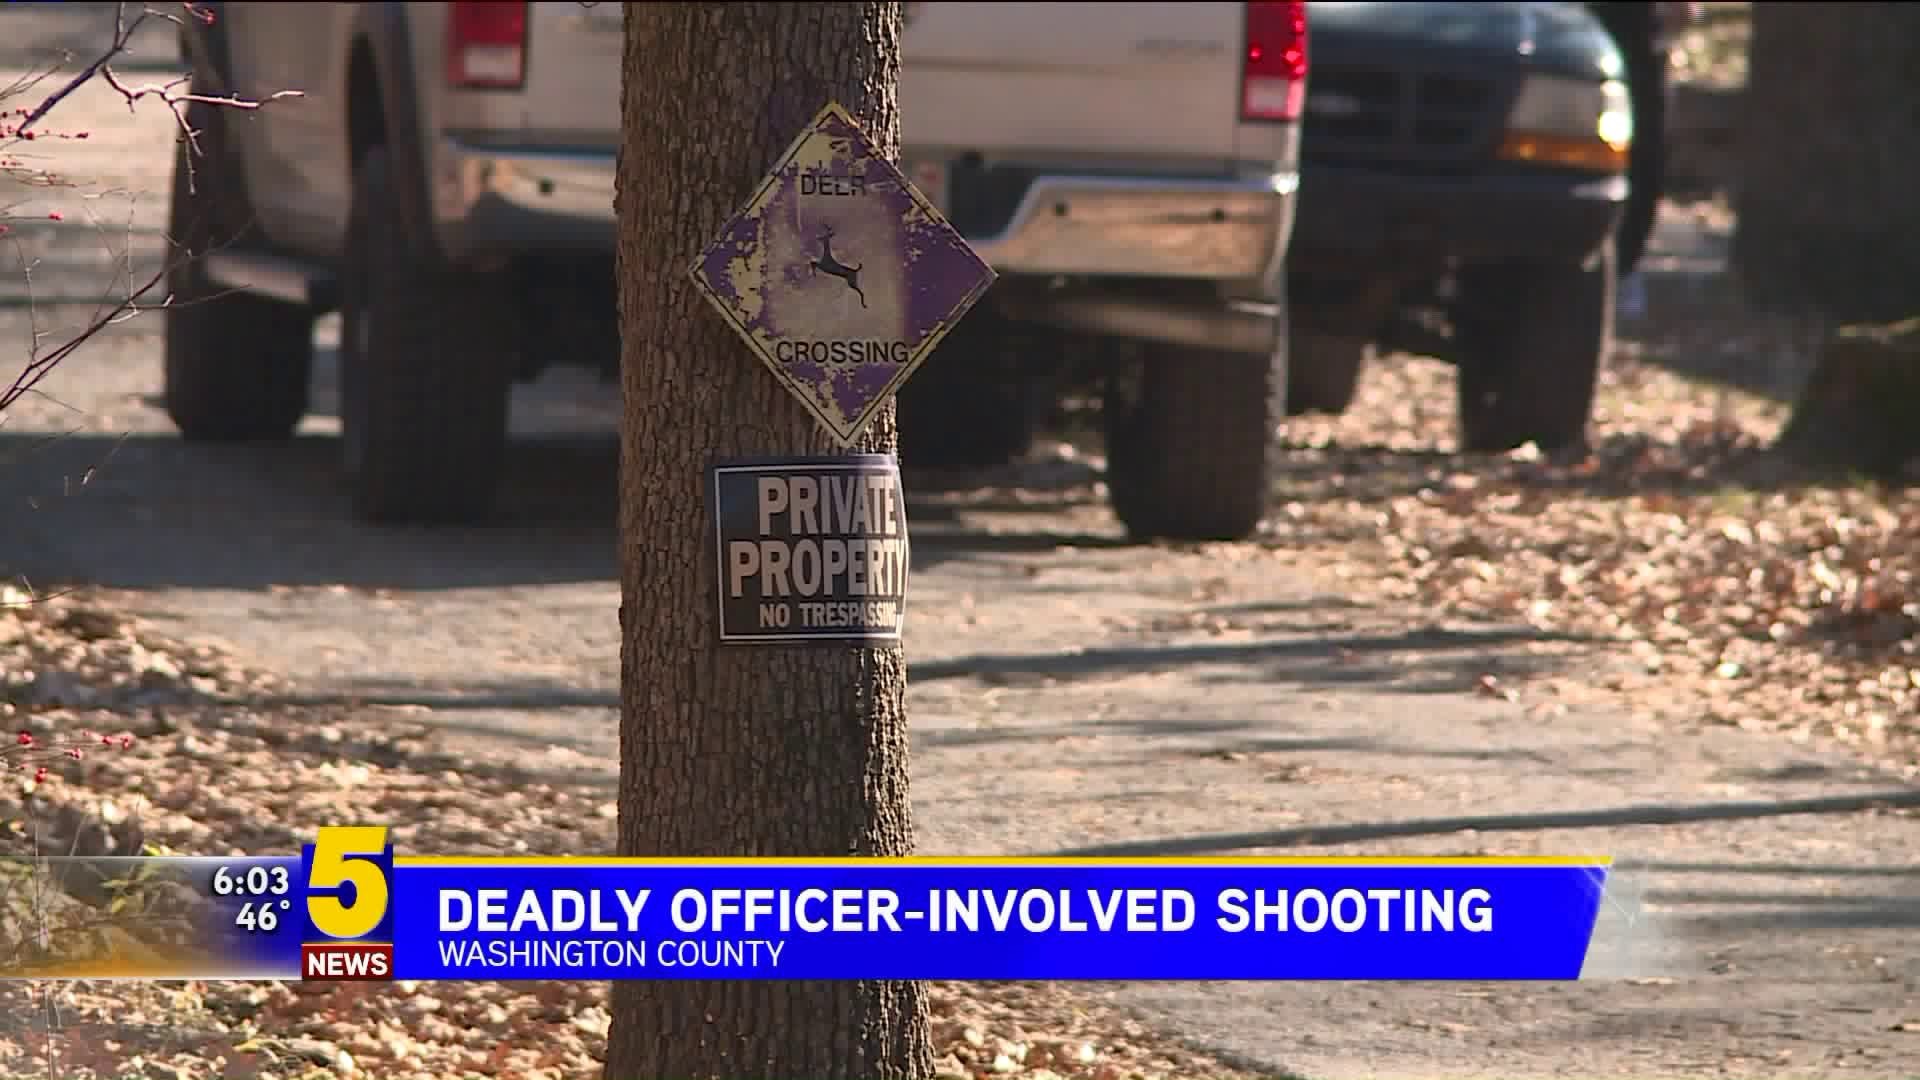 Deadly Officer Involved Shooting In Washington County